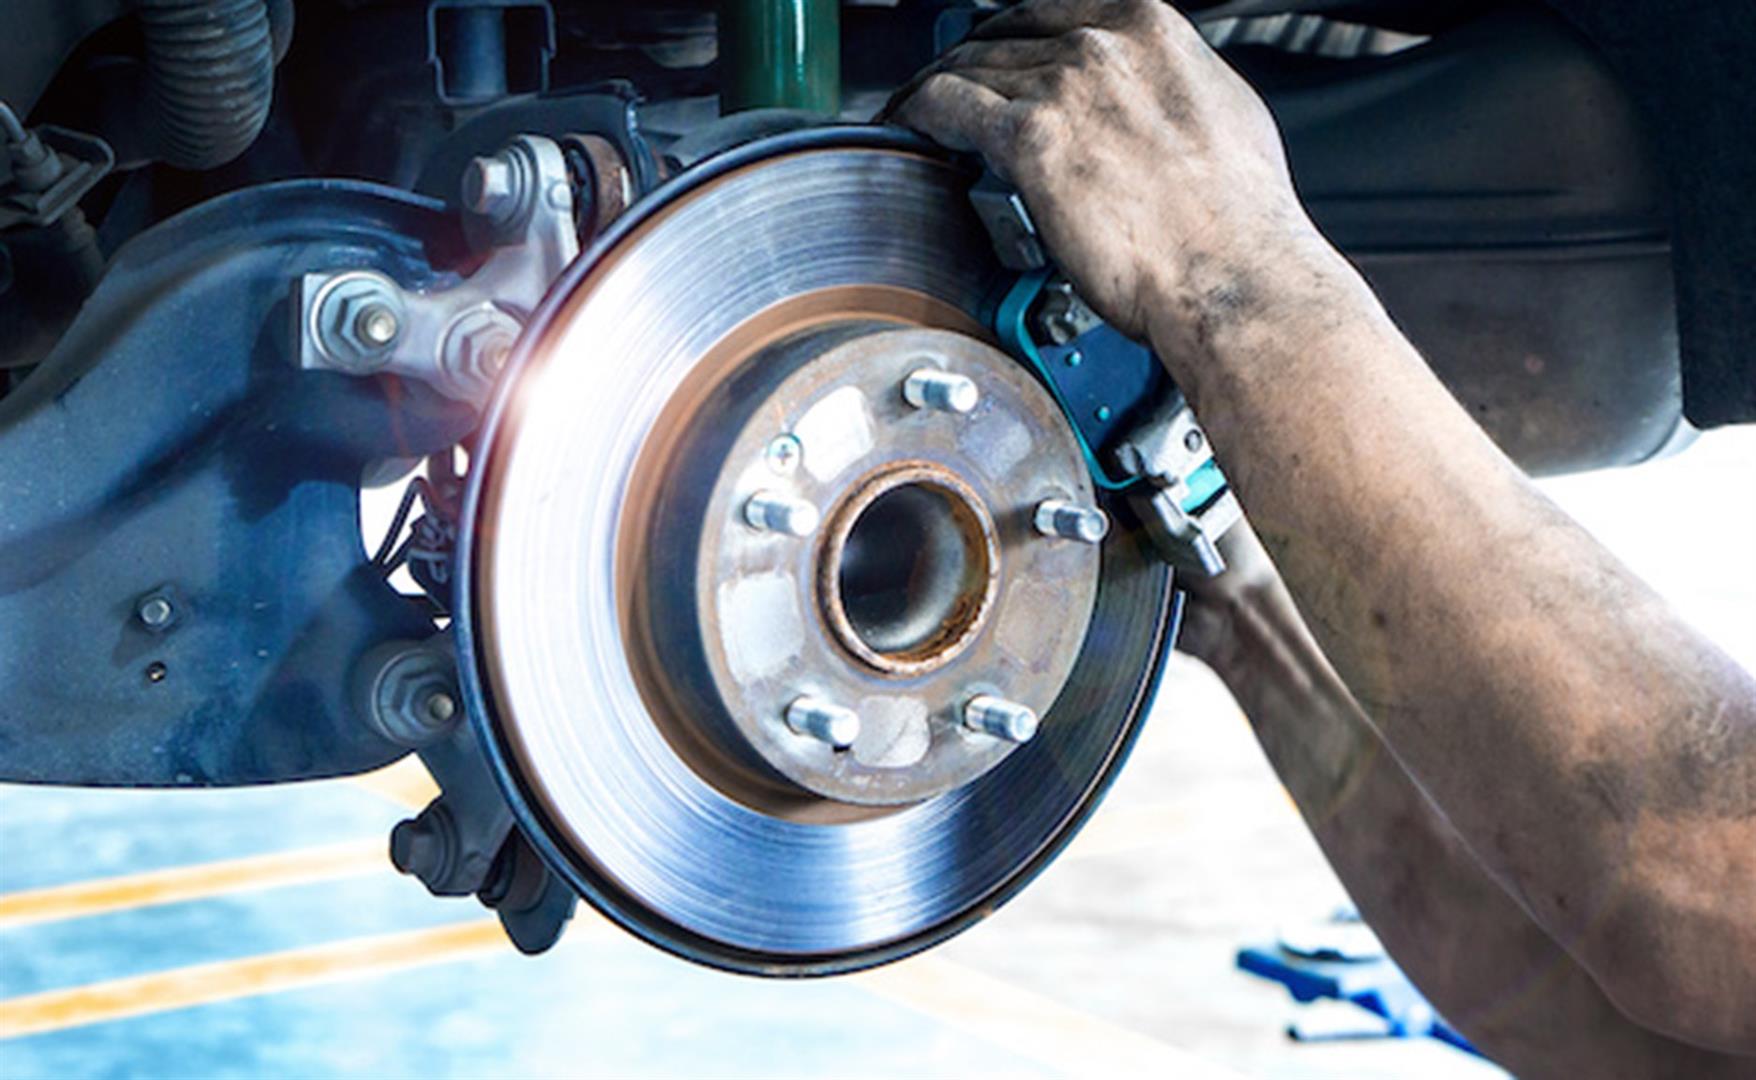 How To Tell If You Need Brake Service & Repairs